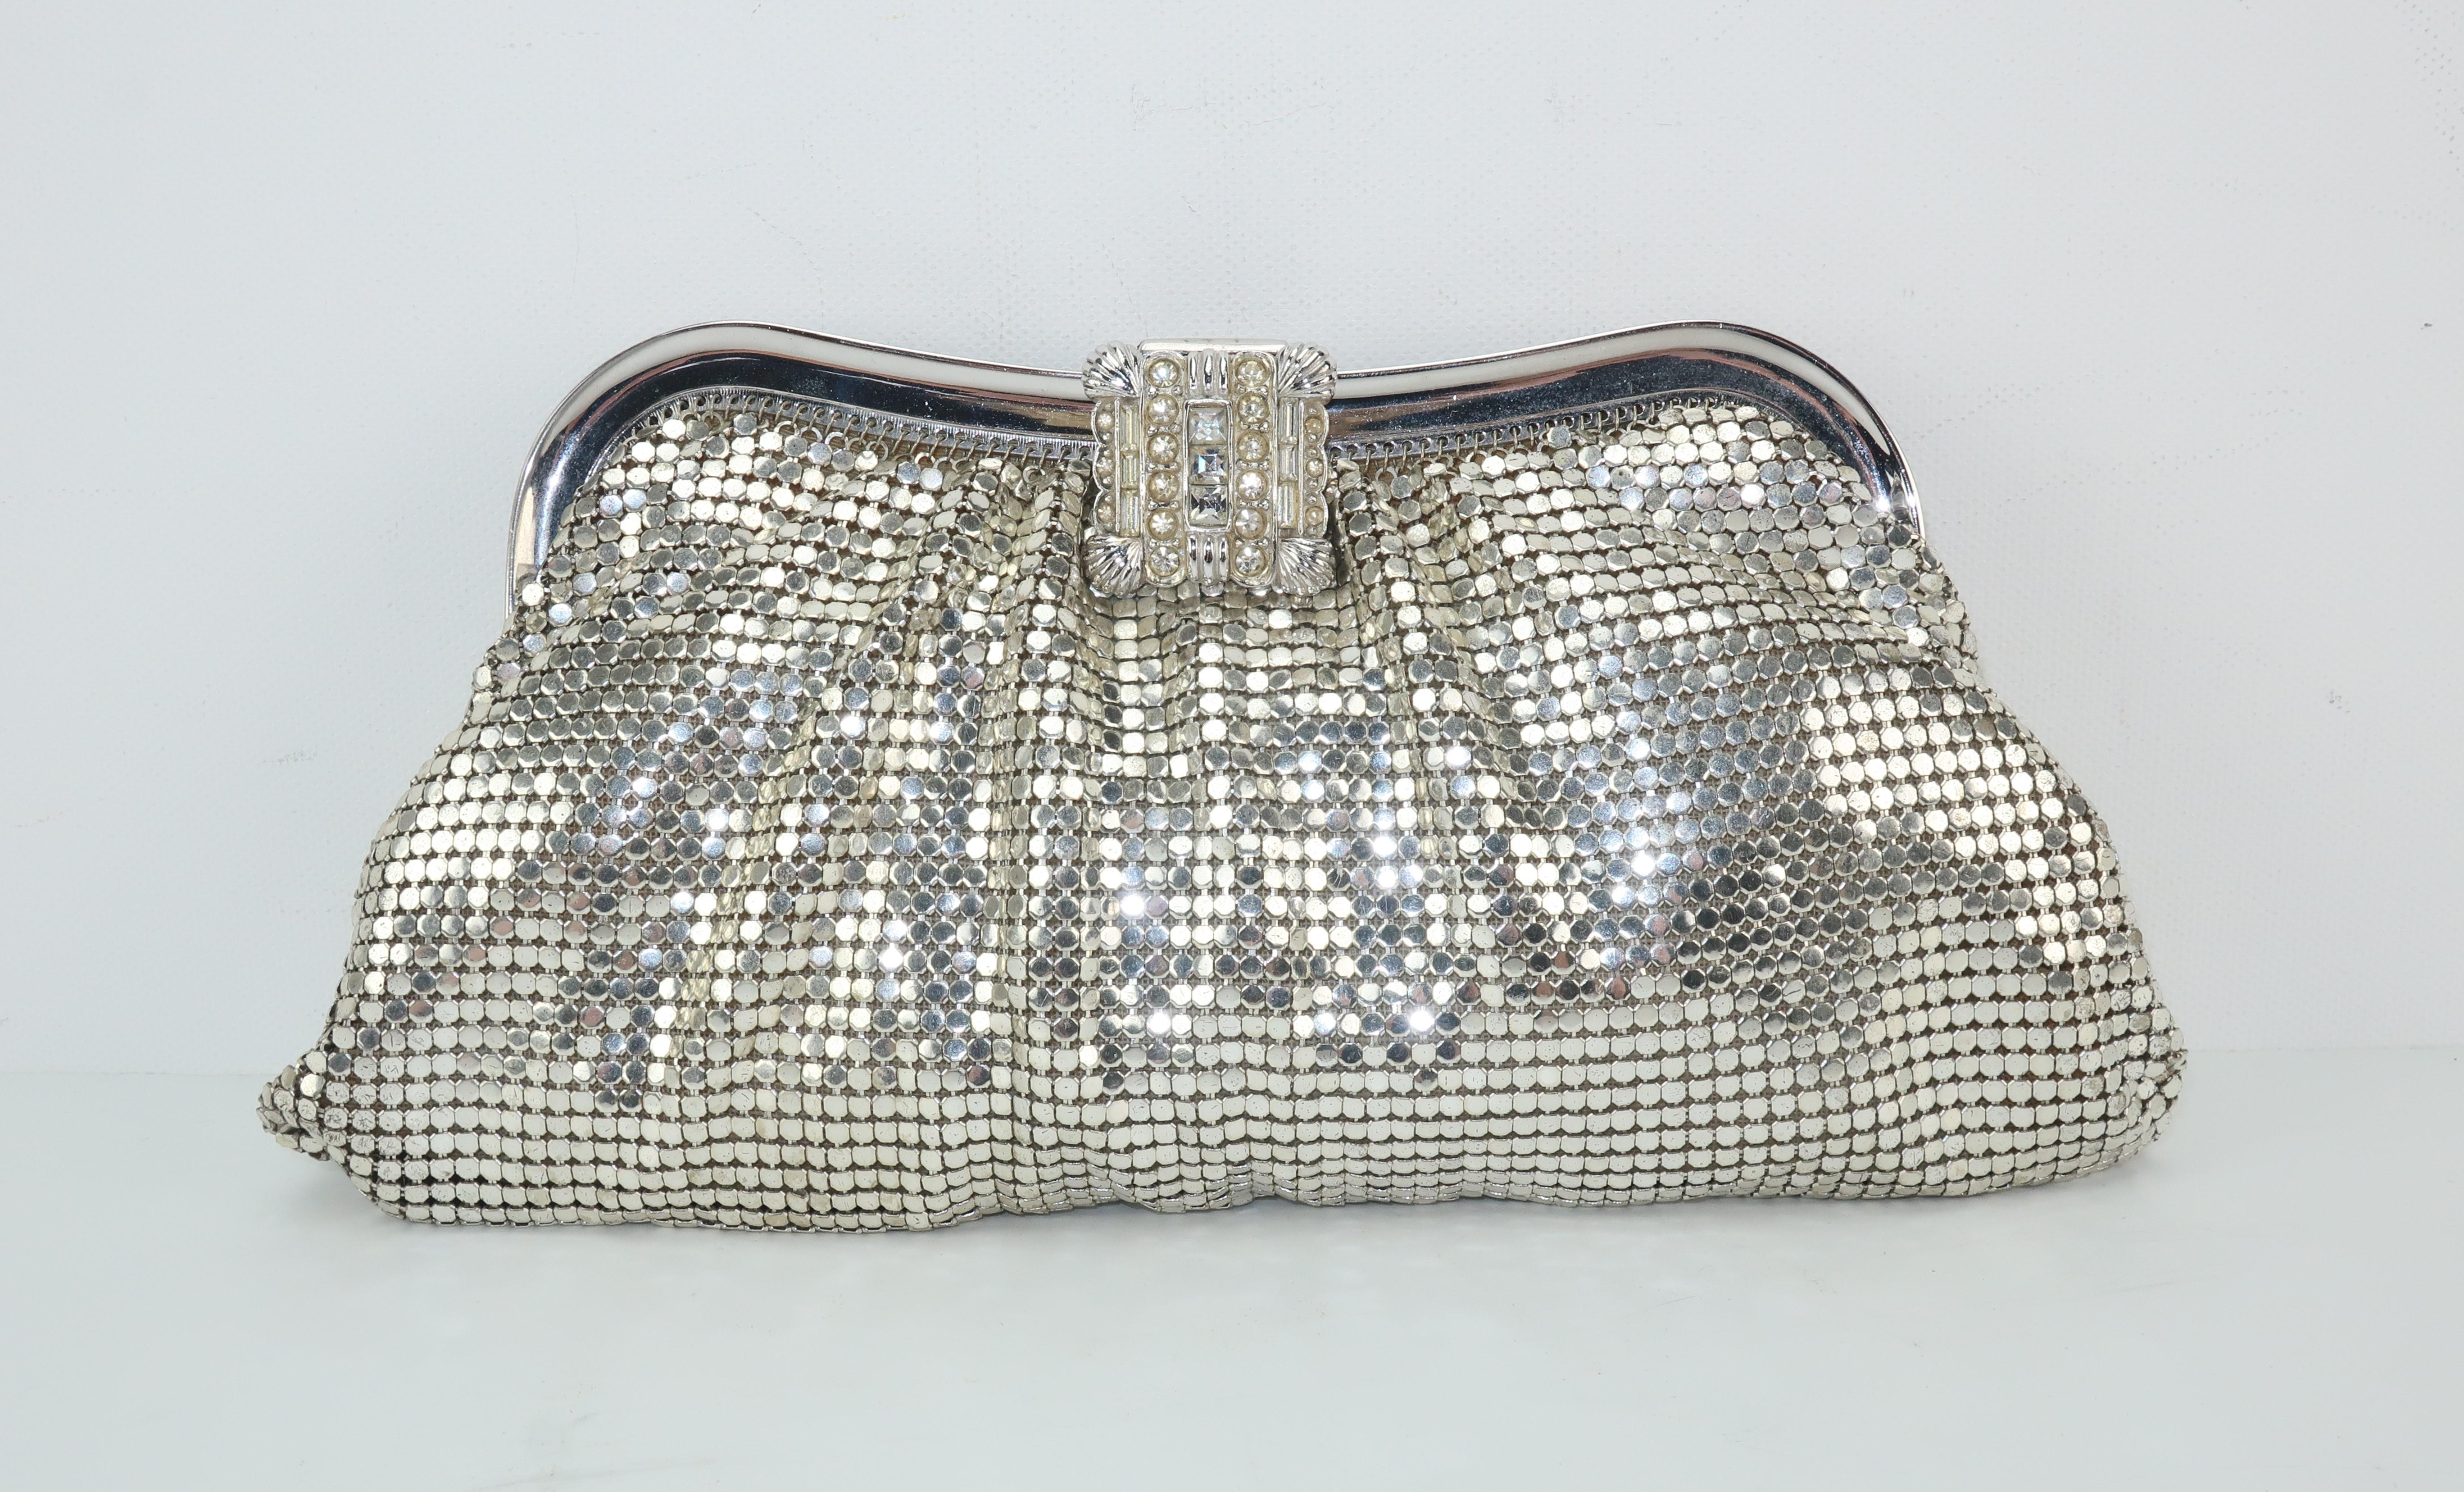 This glamorous silver mesh evening handbag by Whiting & Davis will take you from deco to disco!  Whiting & Davis has been producing fashionable handbags since the late 1800’s and their signature mesh designs represent classic American glamour. The